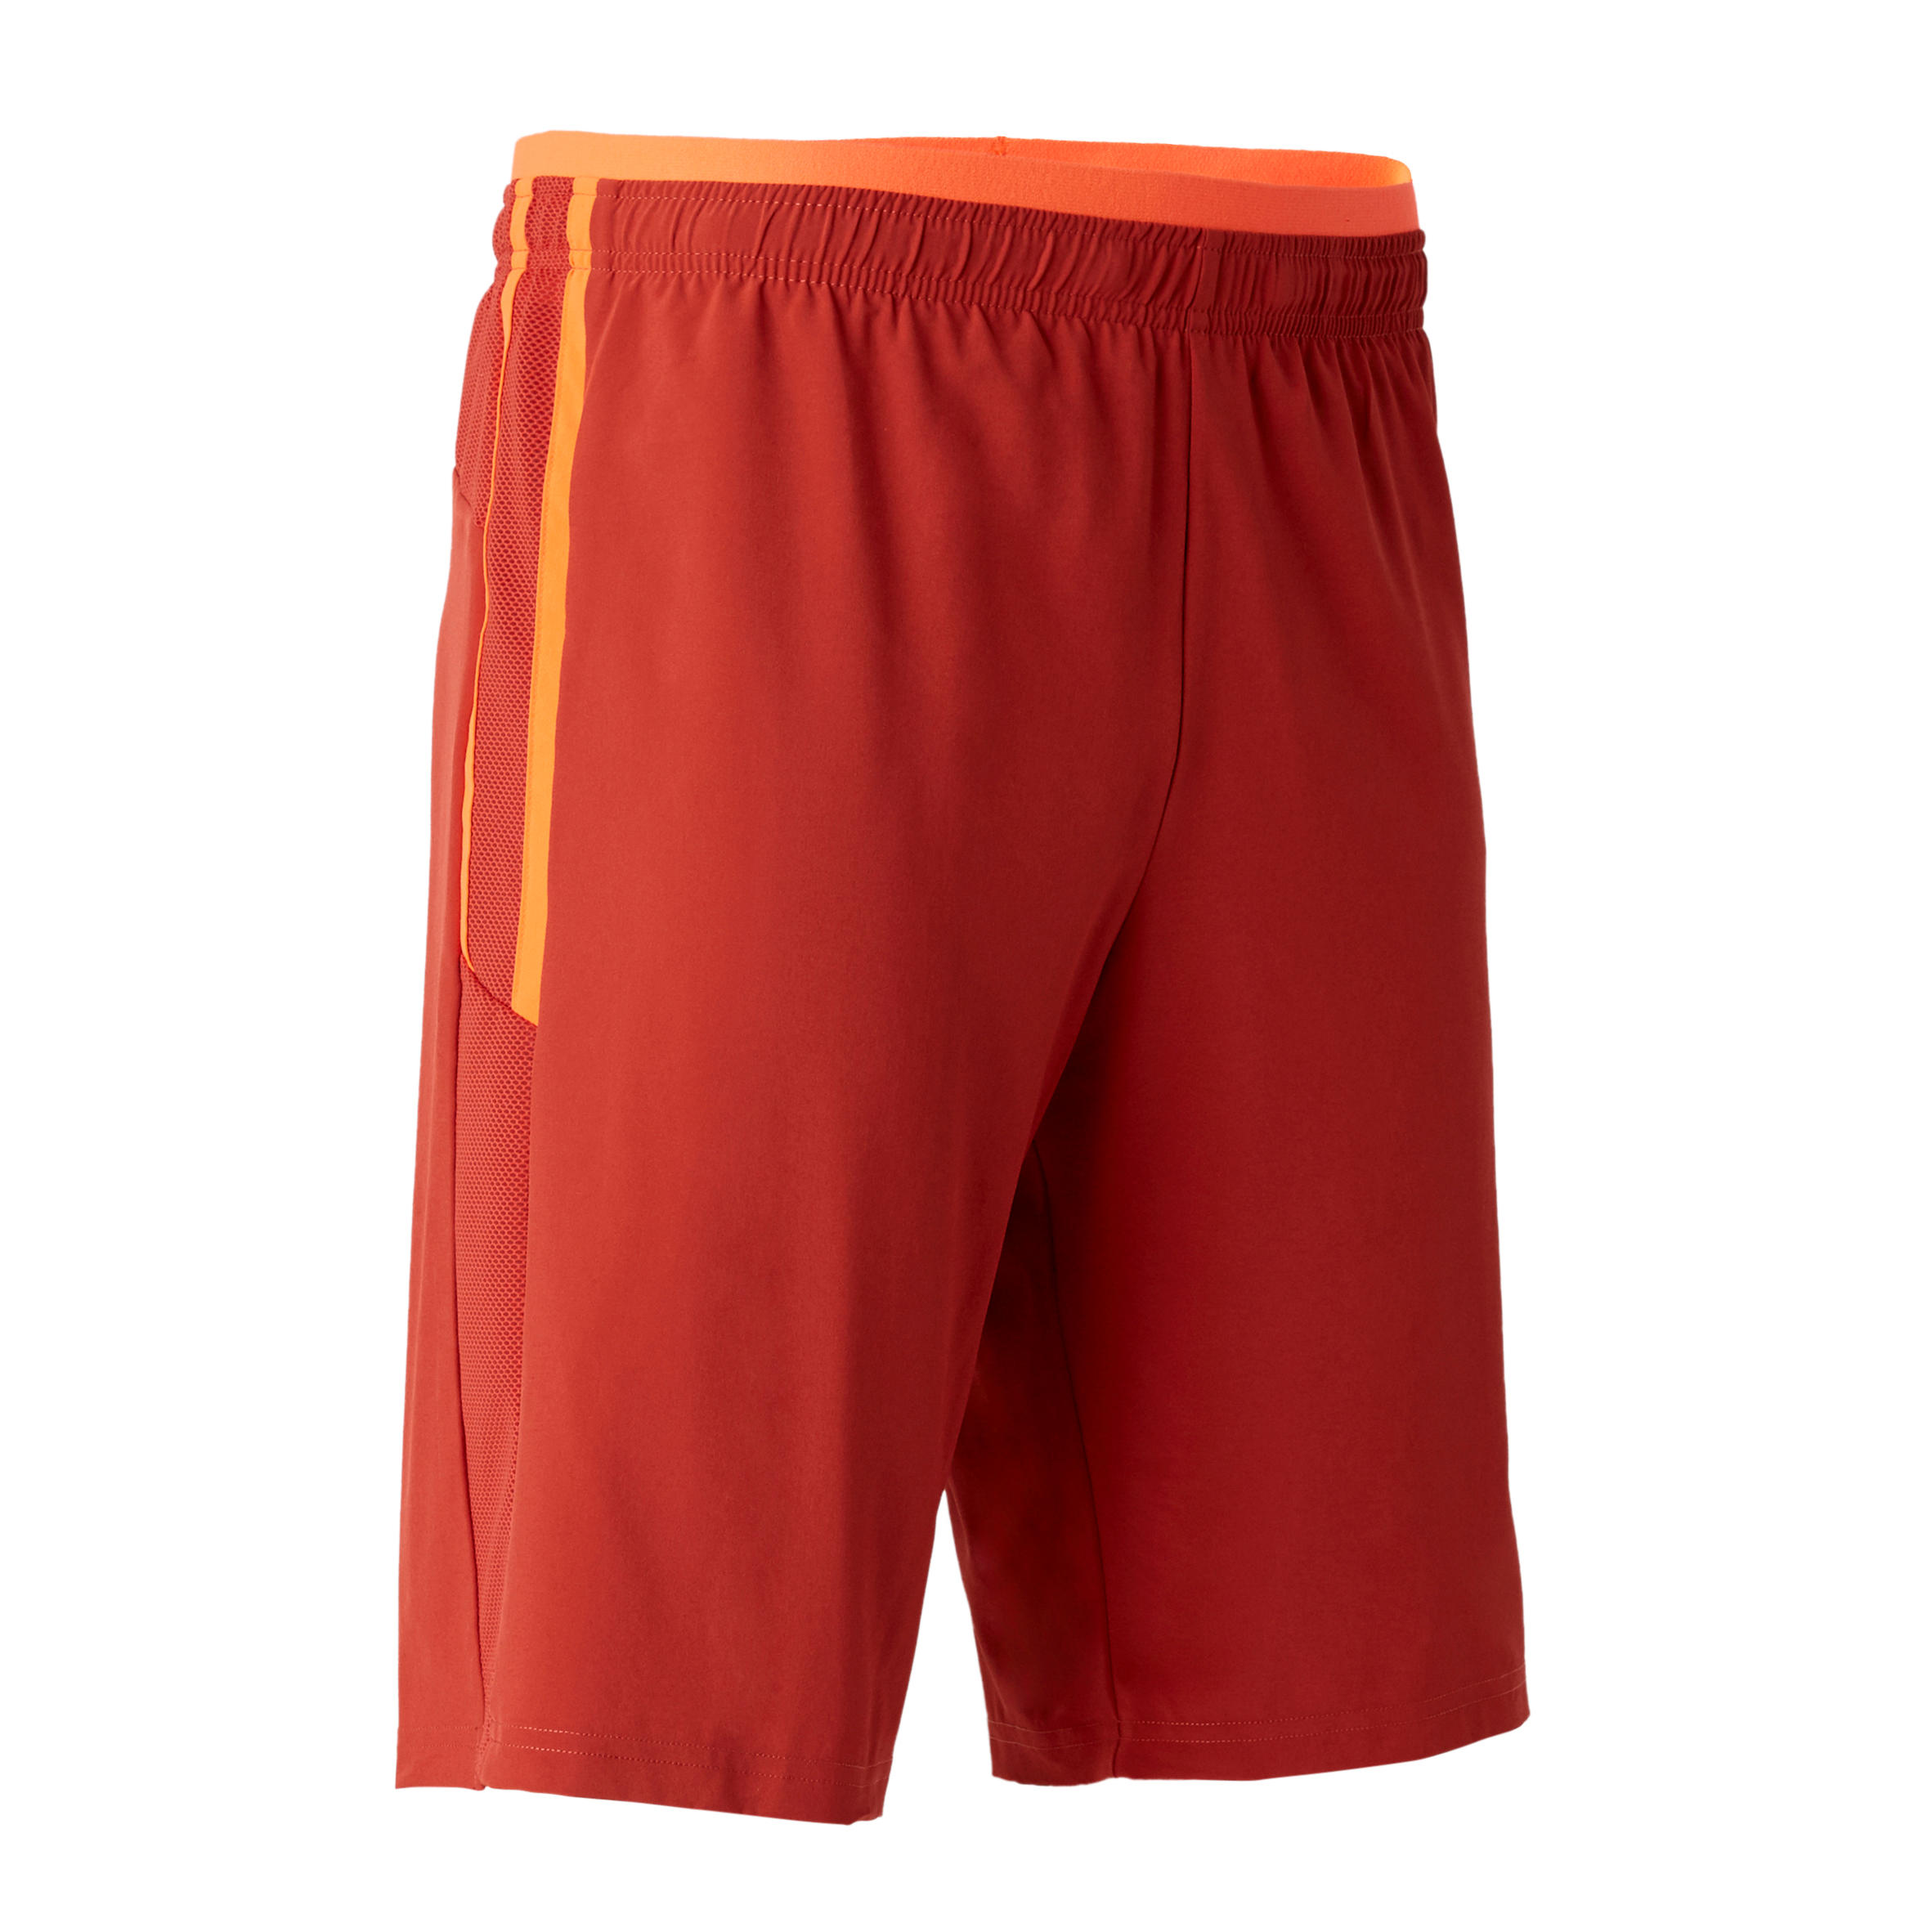 Adult 3-in-1 Football Shorts Traxium - Red 2/8